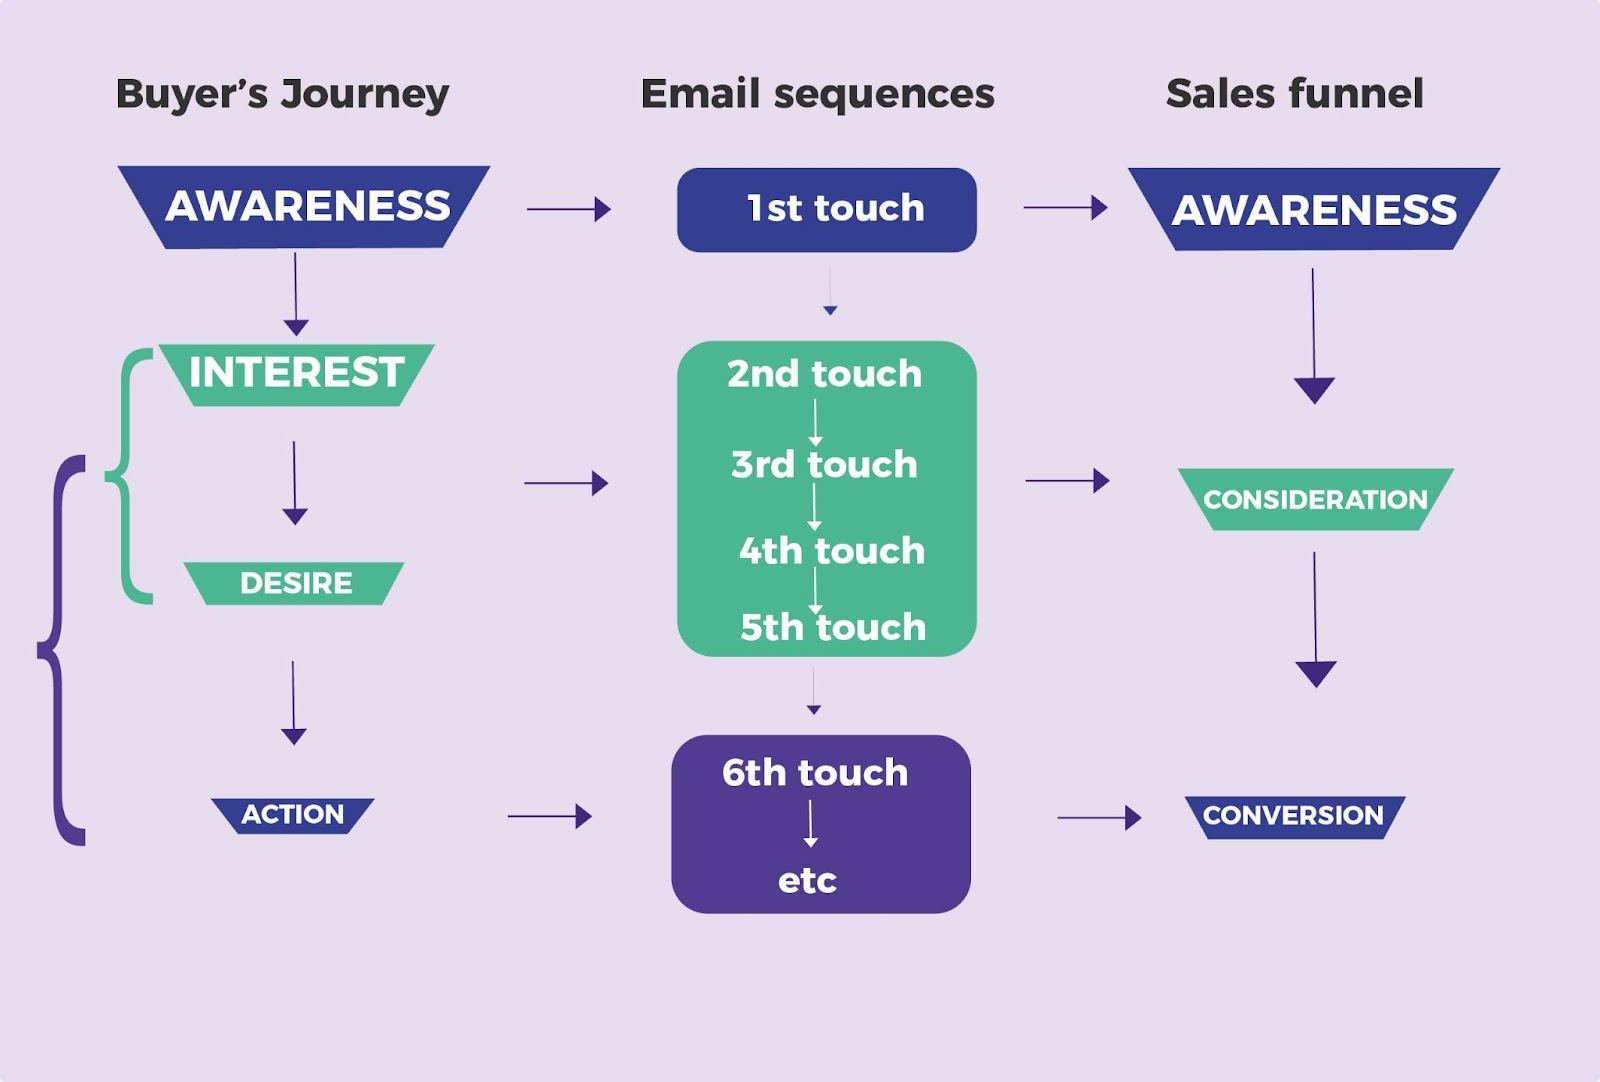 Email sequence, buyer's journey, email sequence, sale funnel explained